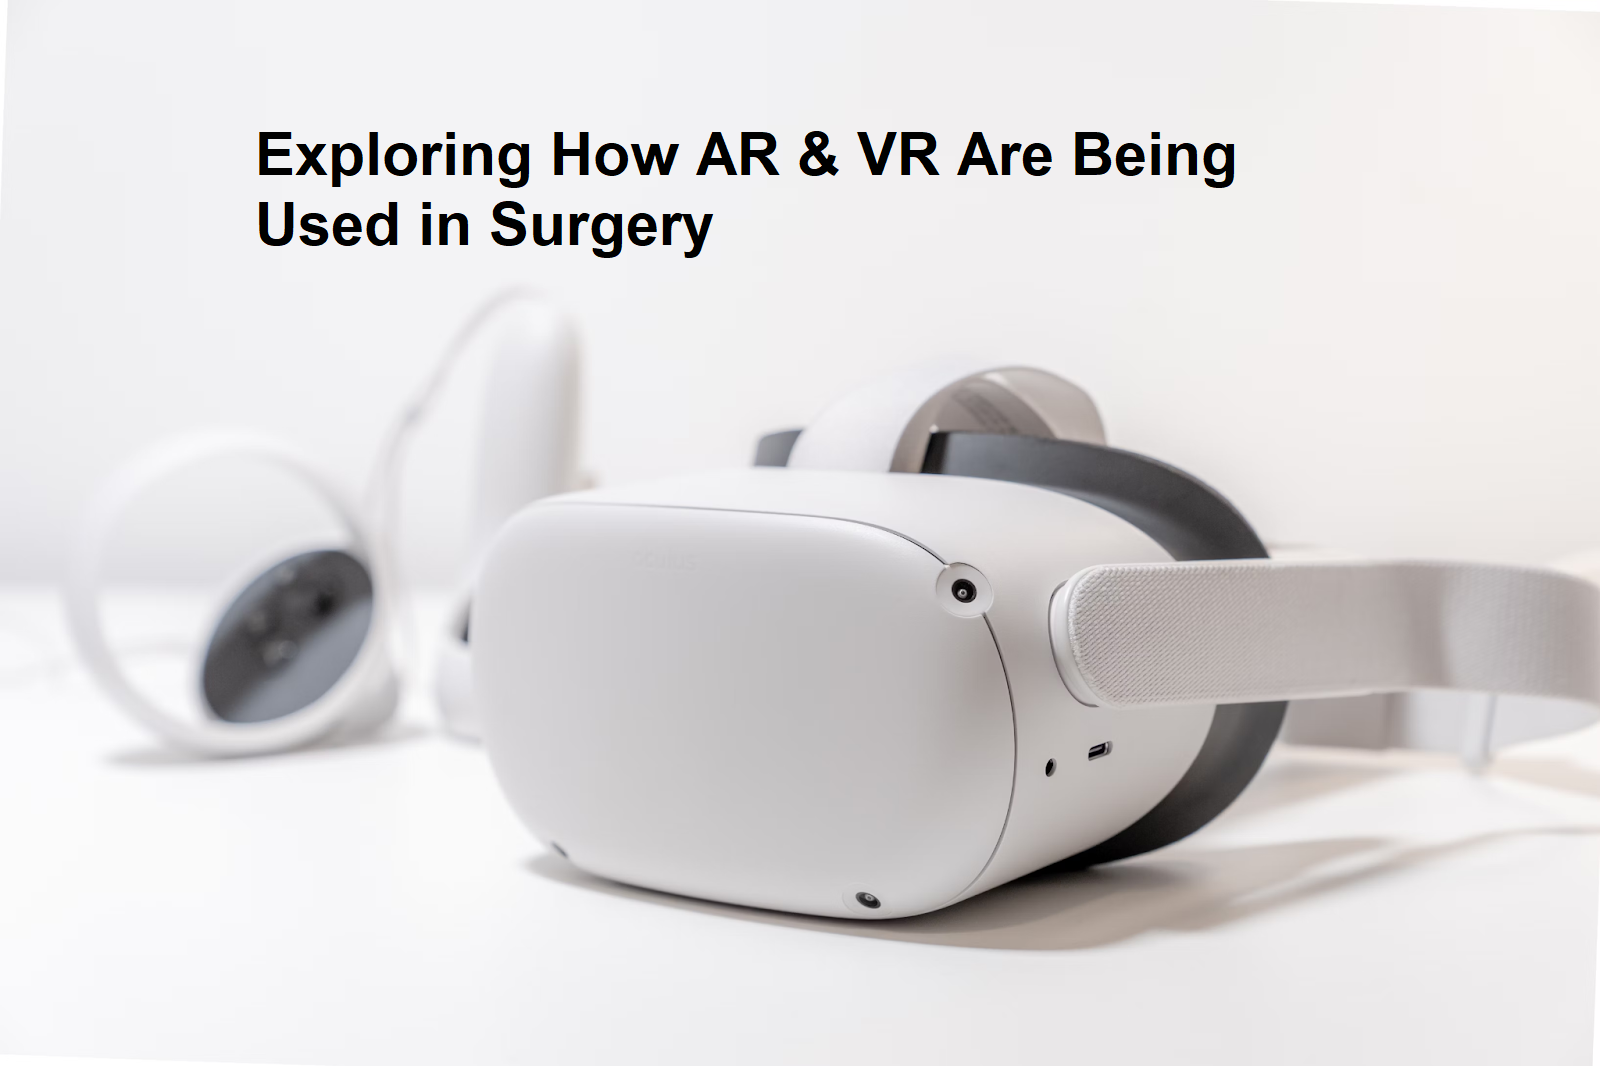 AR & VR in Surgery